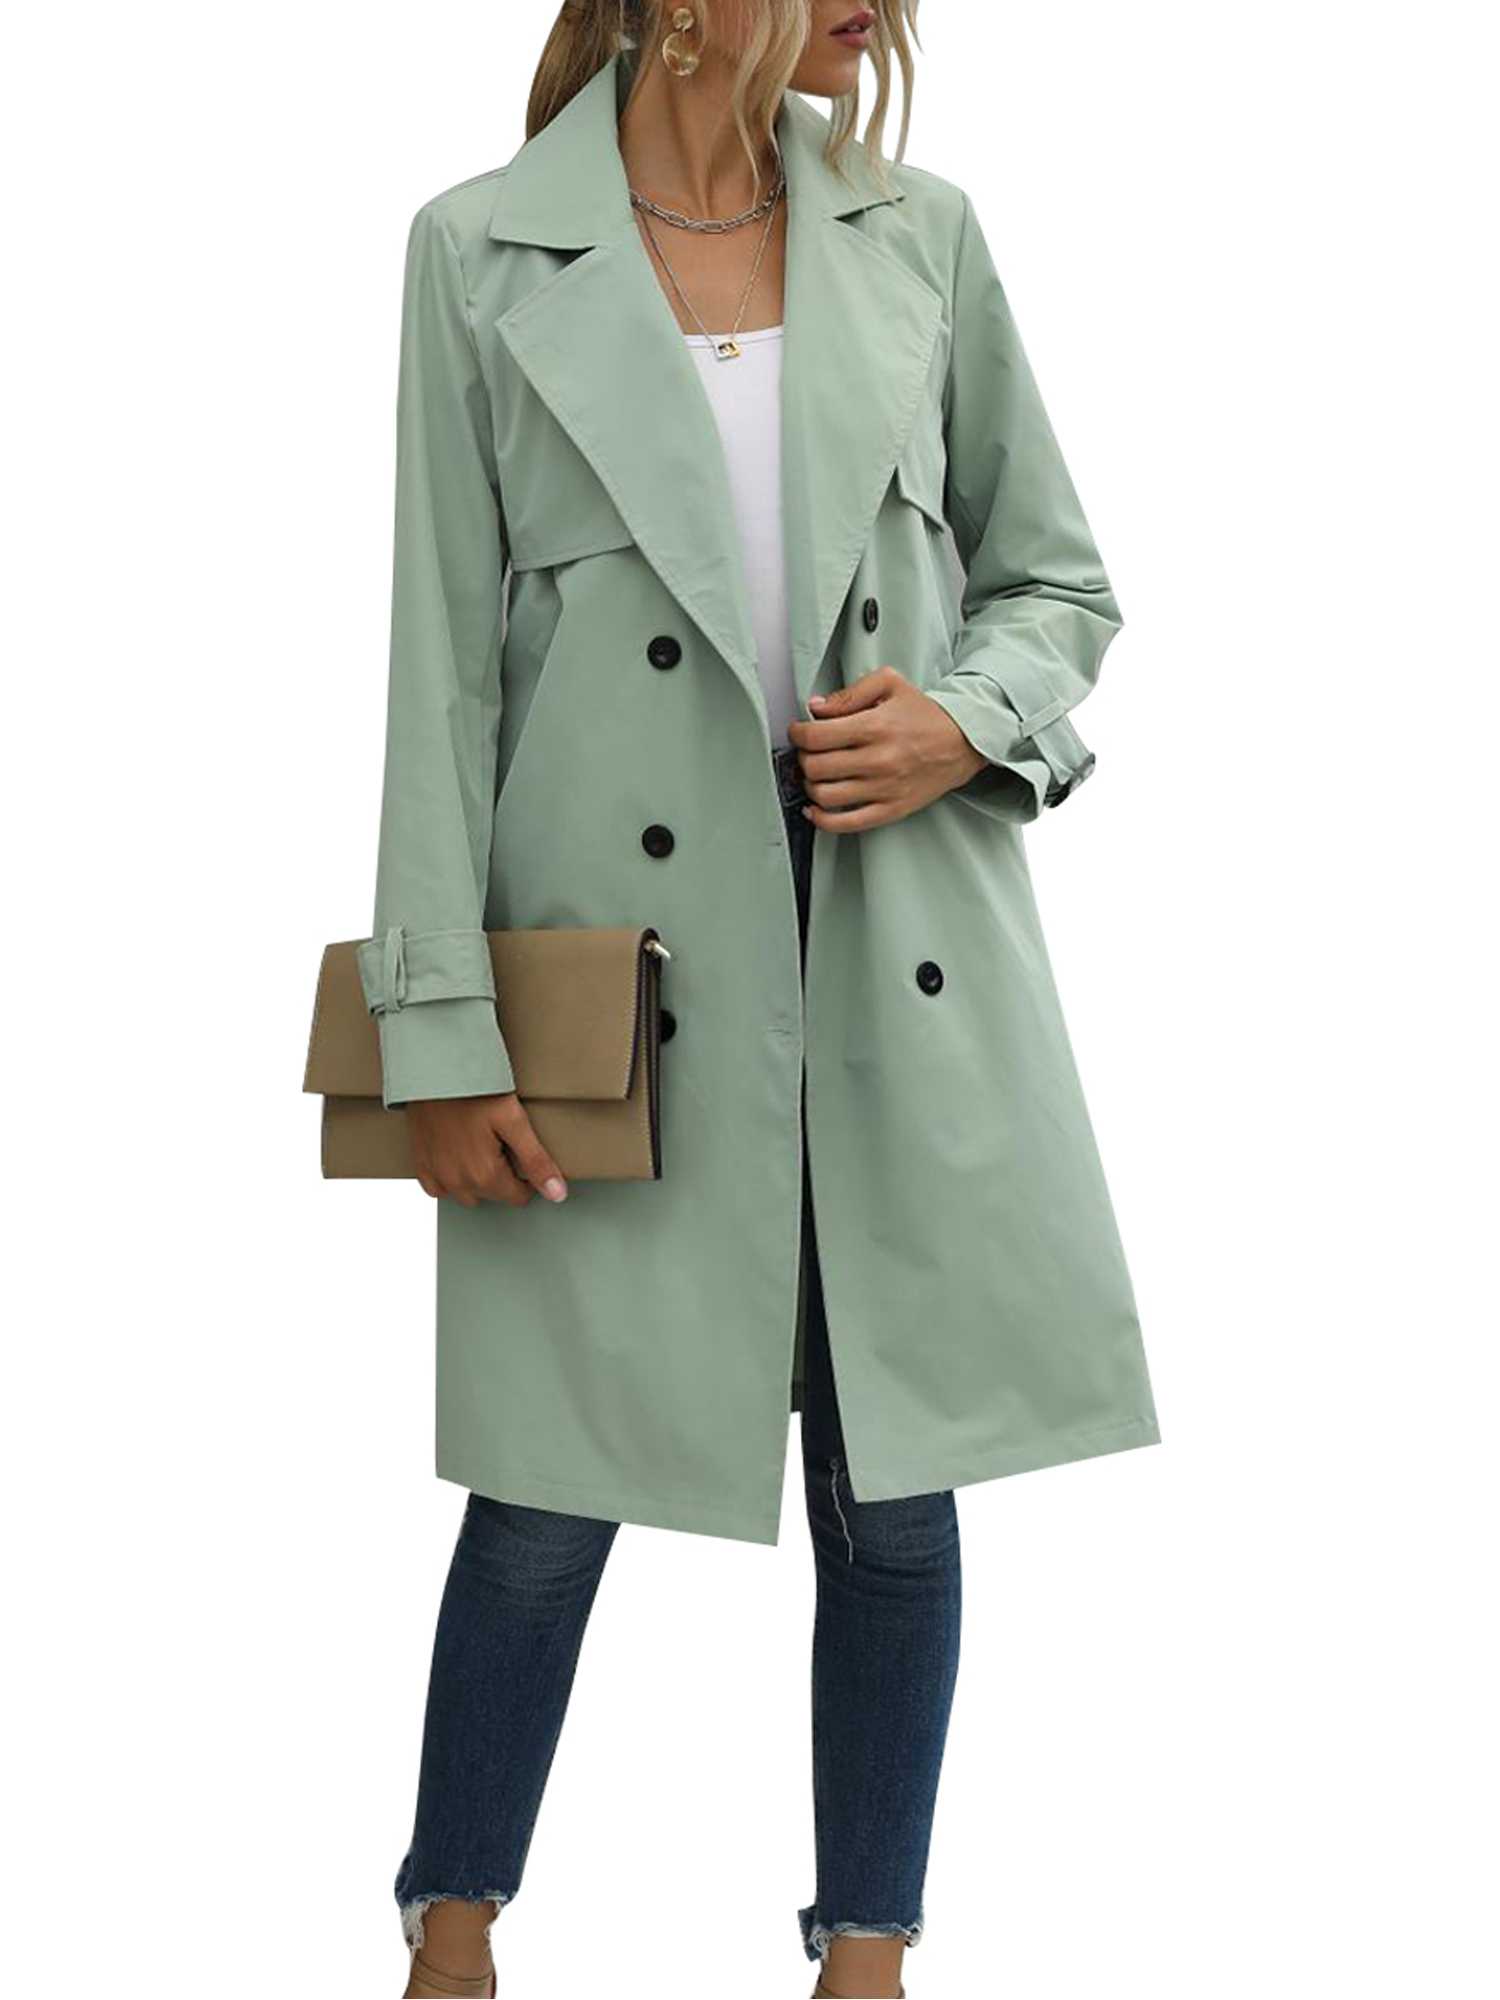 Spring hue Women Jacket Long Sleeve Lapel Double Breasted Belted Trench Coat - image 5 of 6